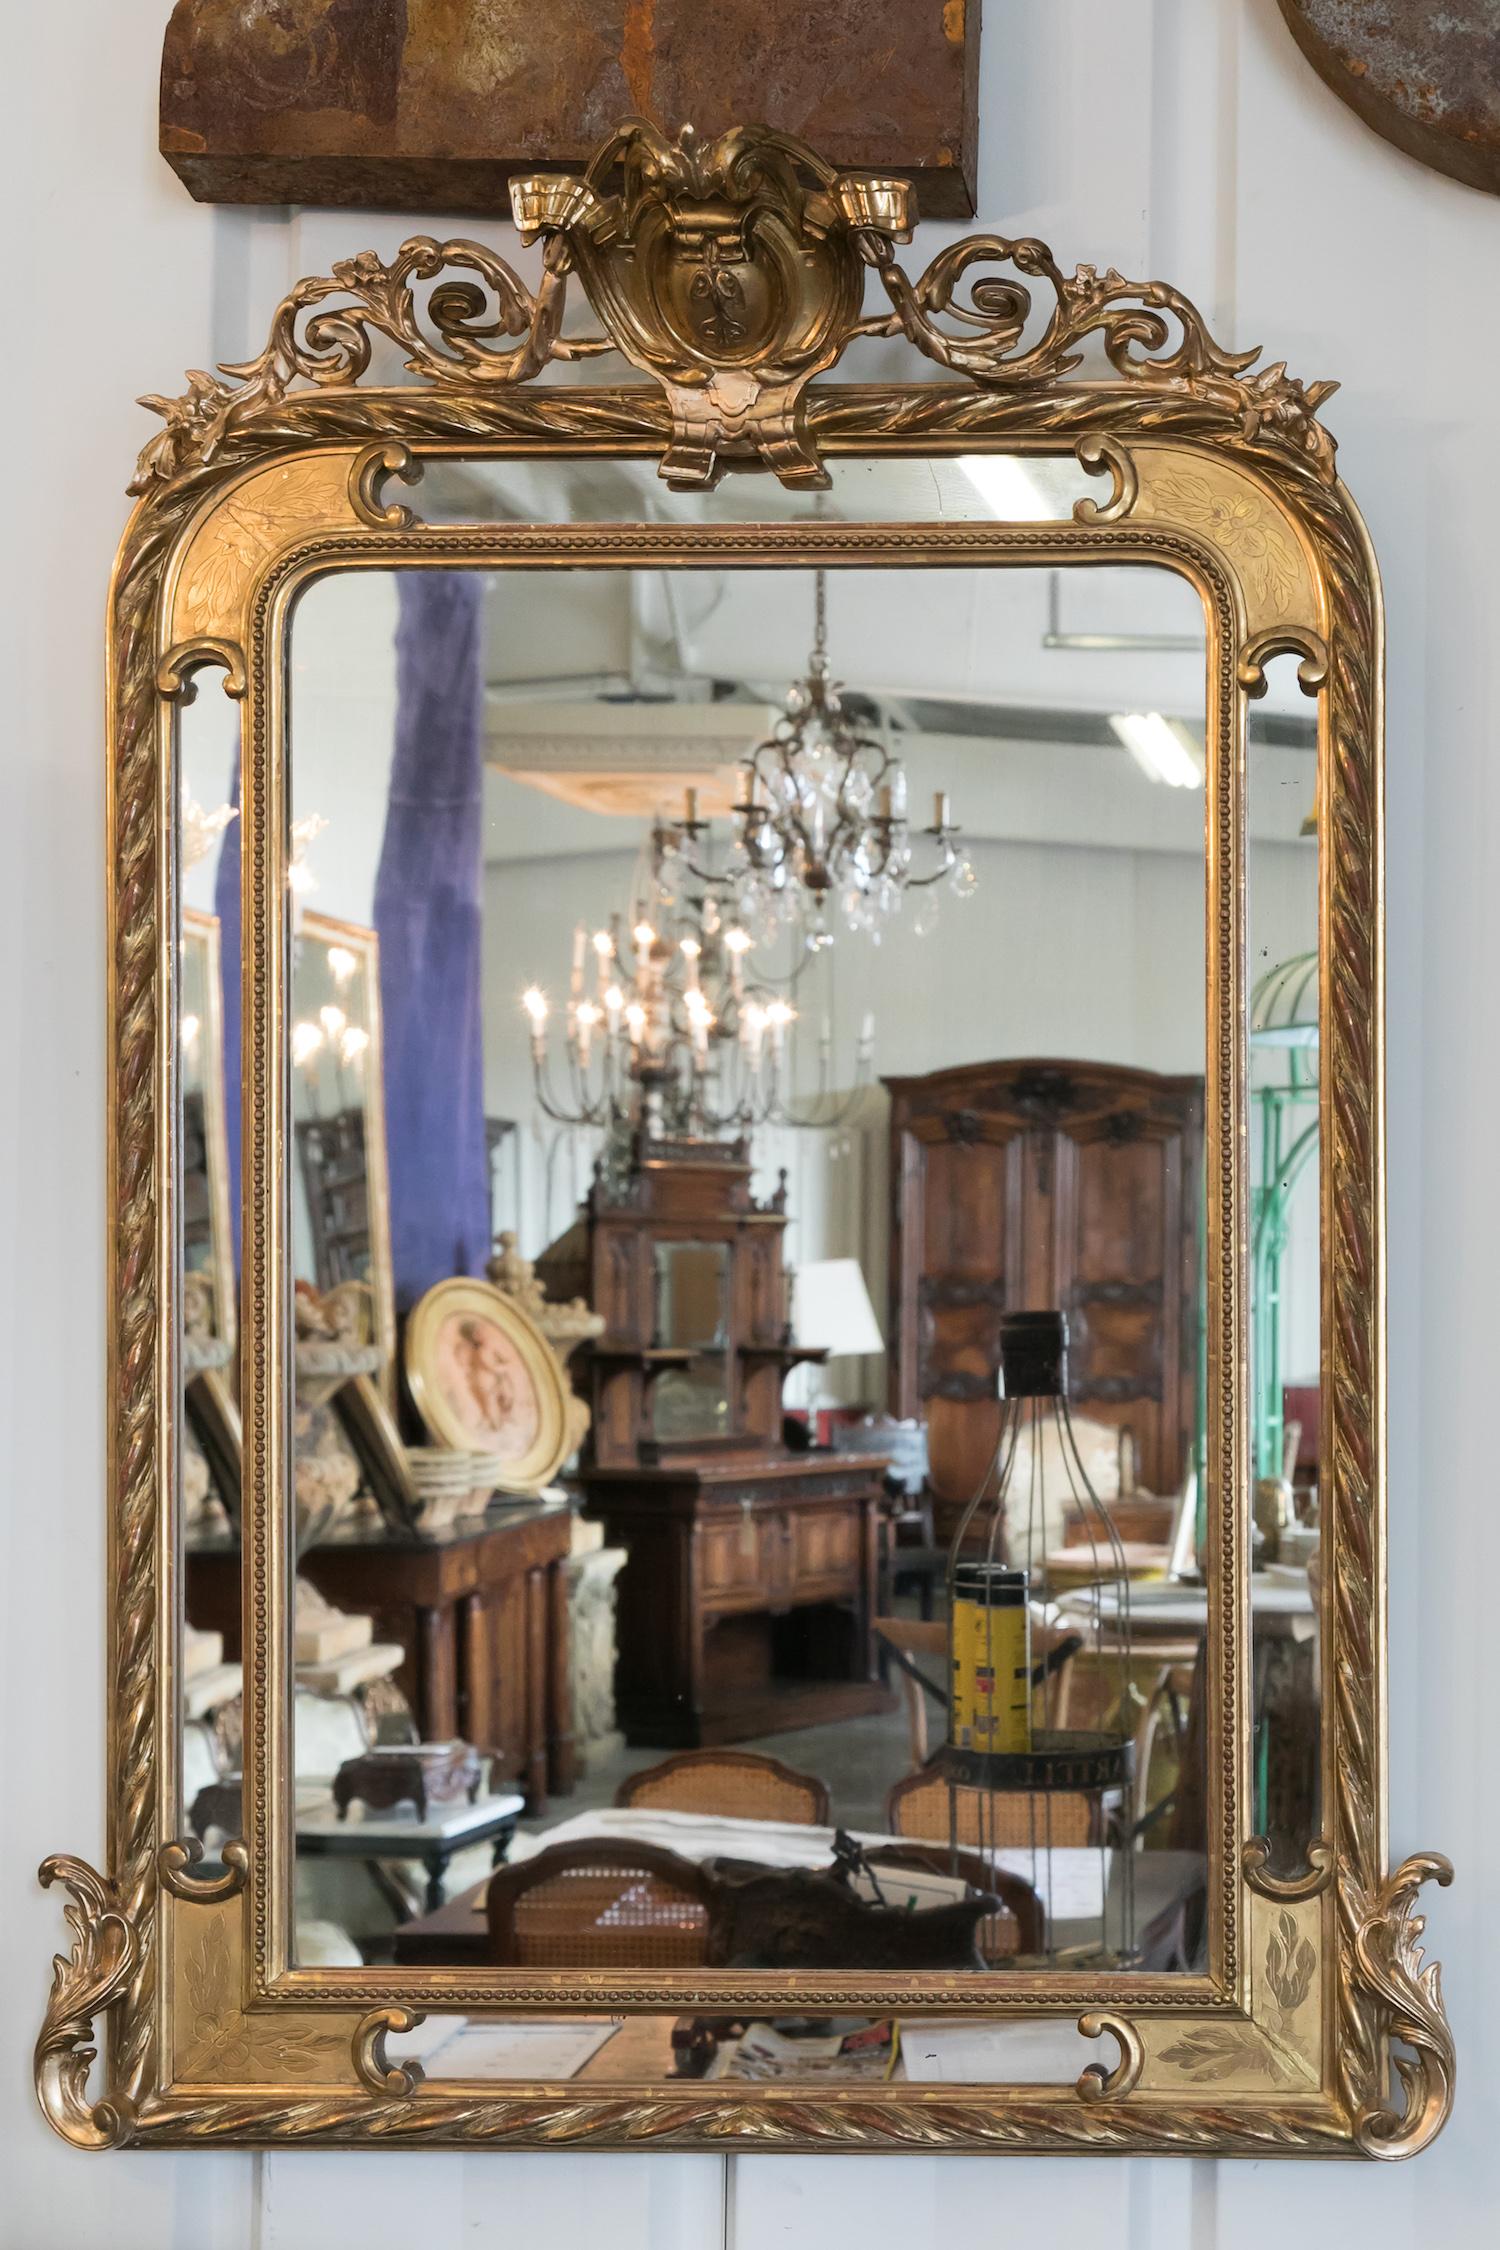 French Napoleon III period pareclose mirror with elaborately carved giltwood frame with red oxidation showing through. Decoration includes a central crest carved in high relief flanked by curving acanthus leaves and flowering branches with the inner